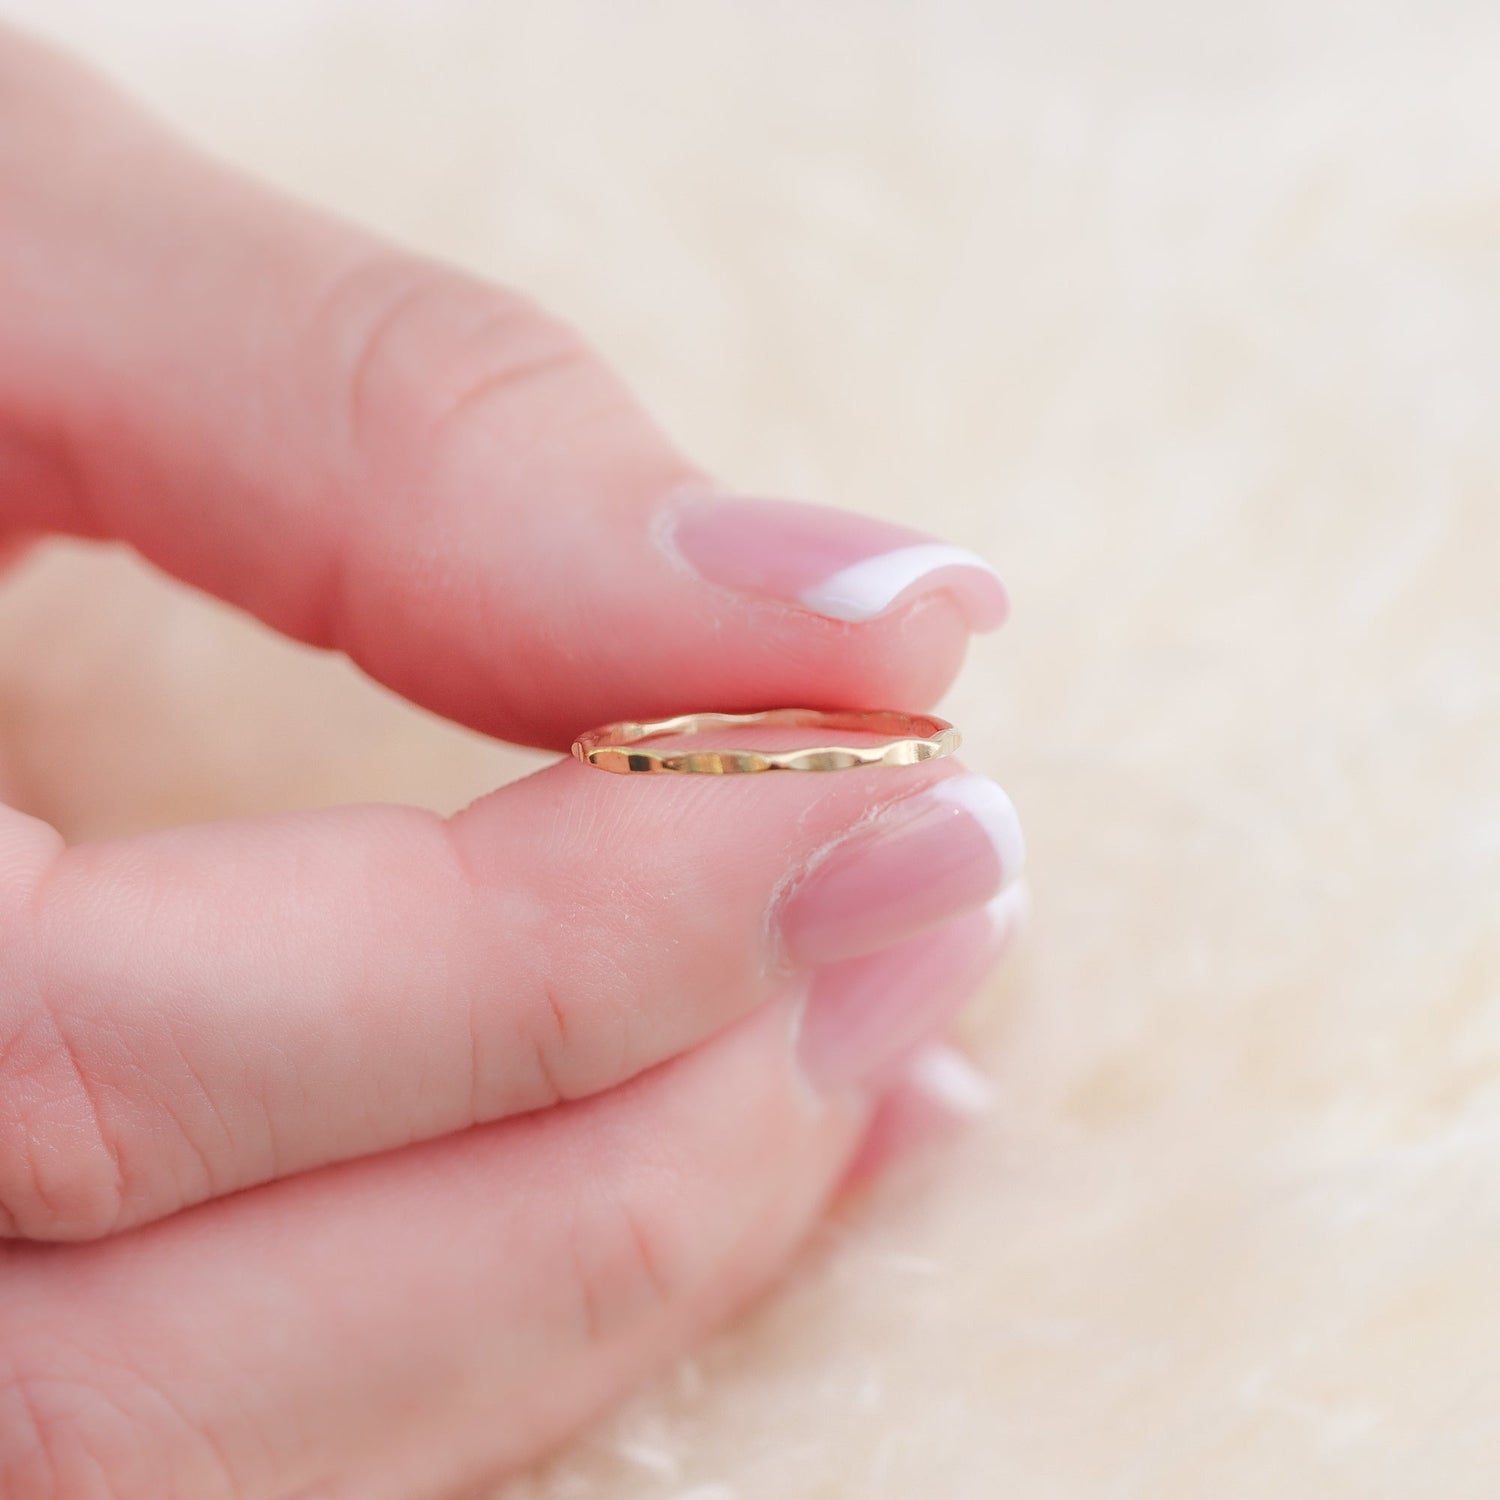 Tiny Hammered Gold Band